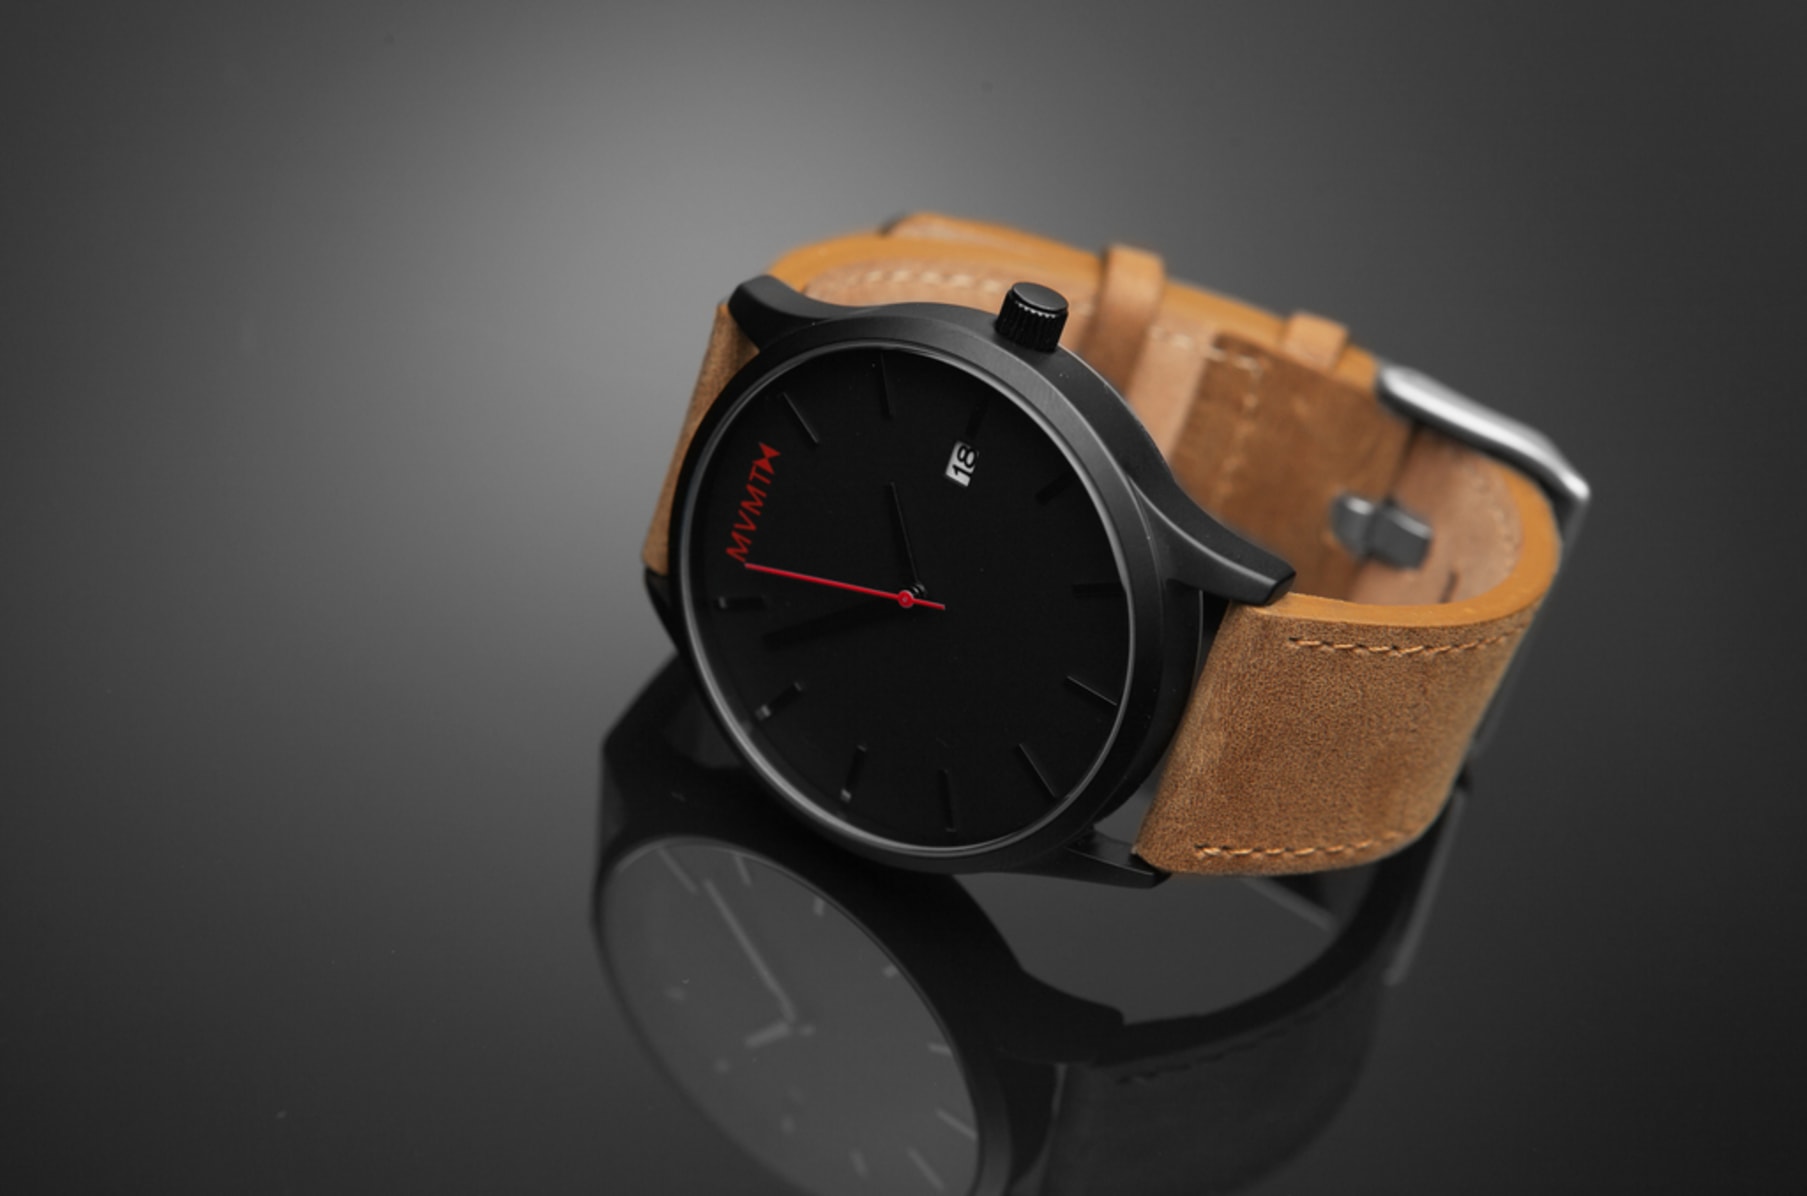 guapo regular tinción MVMT Watches - Affordable, Stylish, High Quality Watches- $59 | Indiegogo